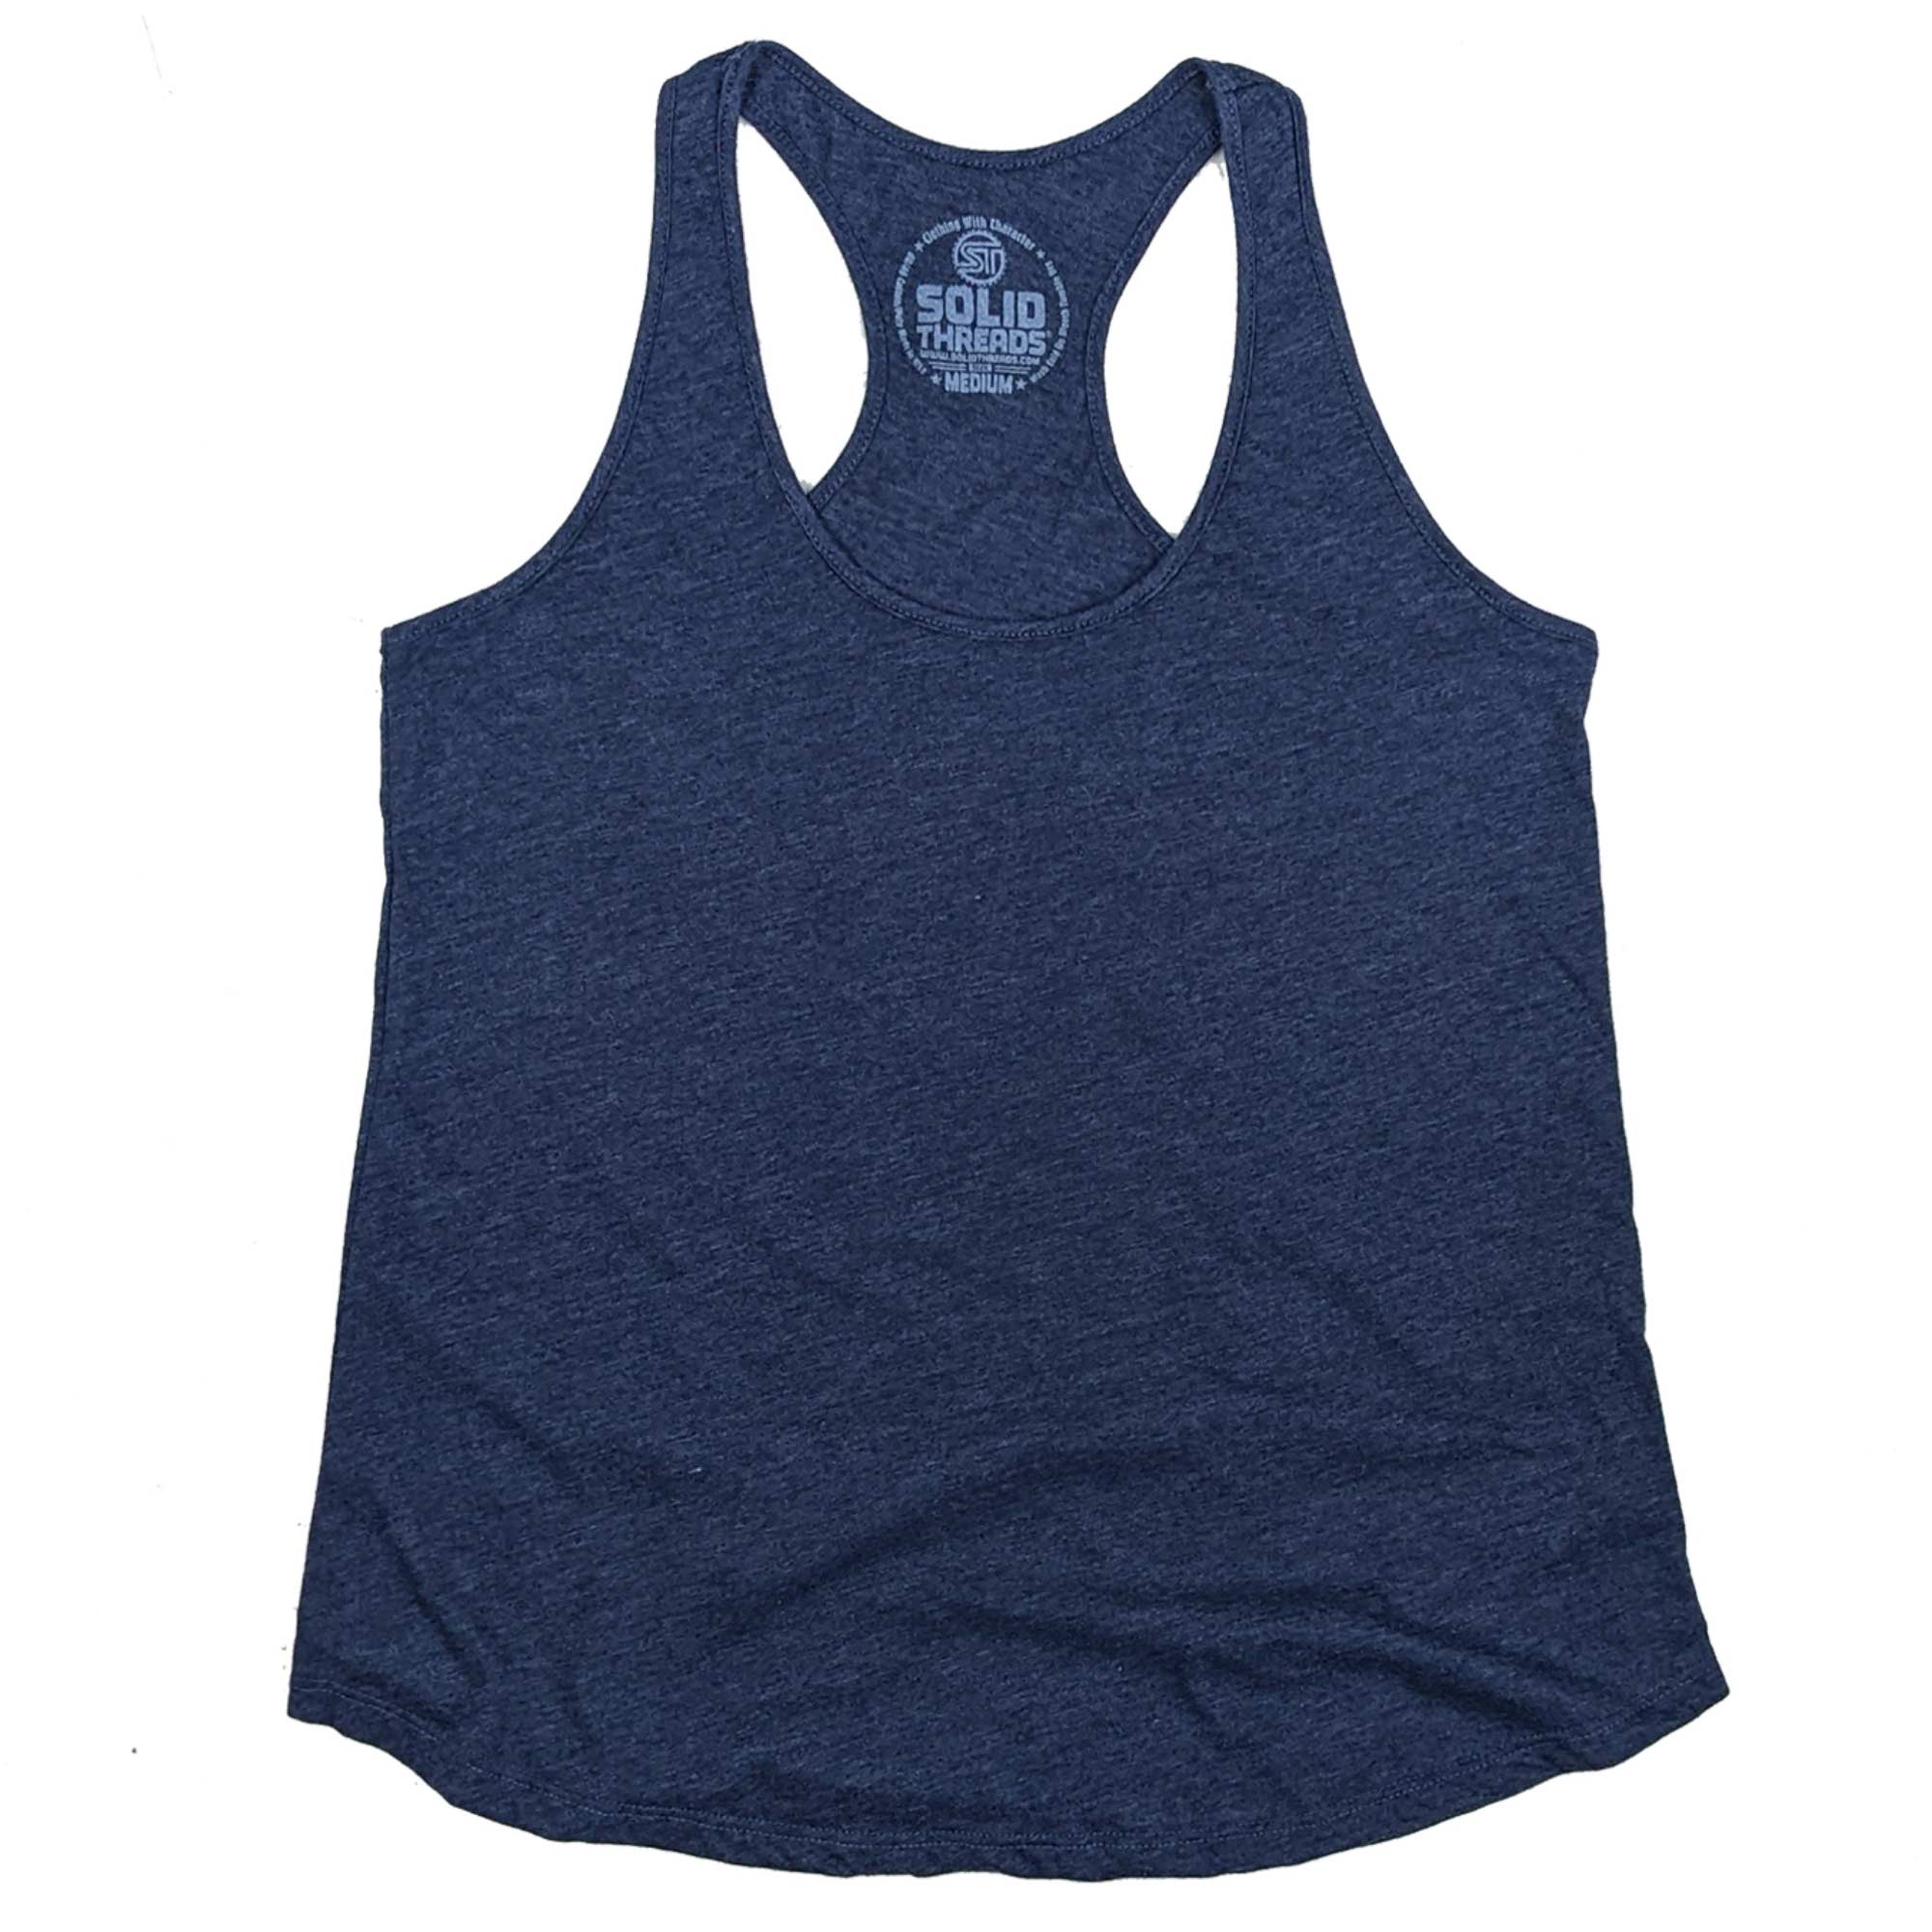 Women's Solid Threads Navy Tank Top | Vintage Inspired USA Made Tee